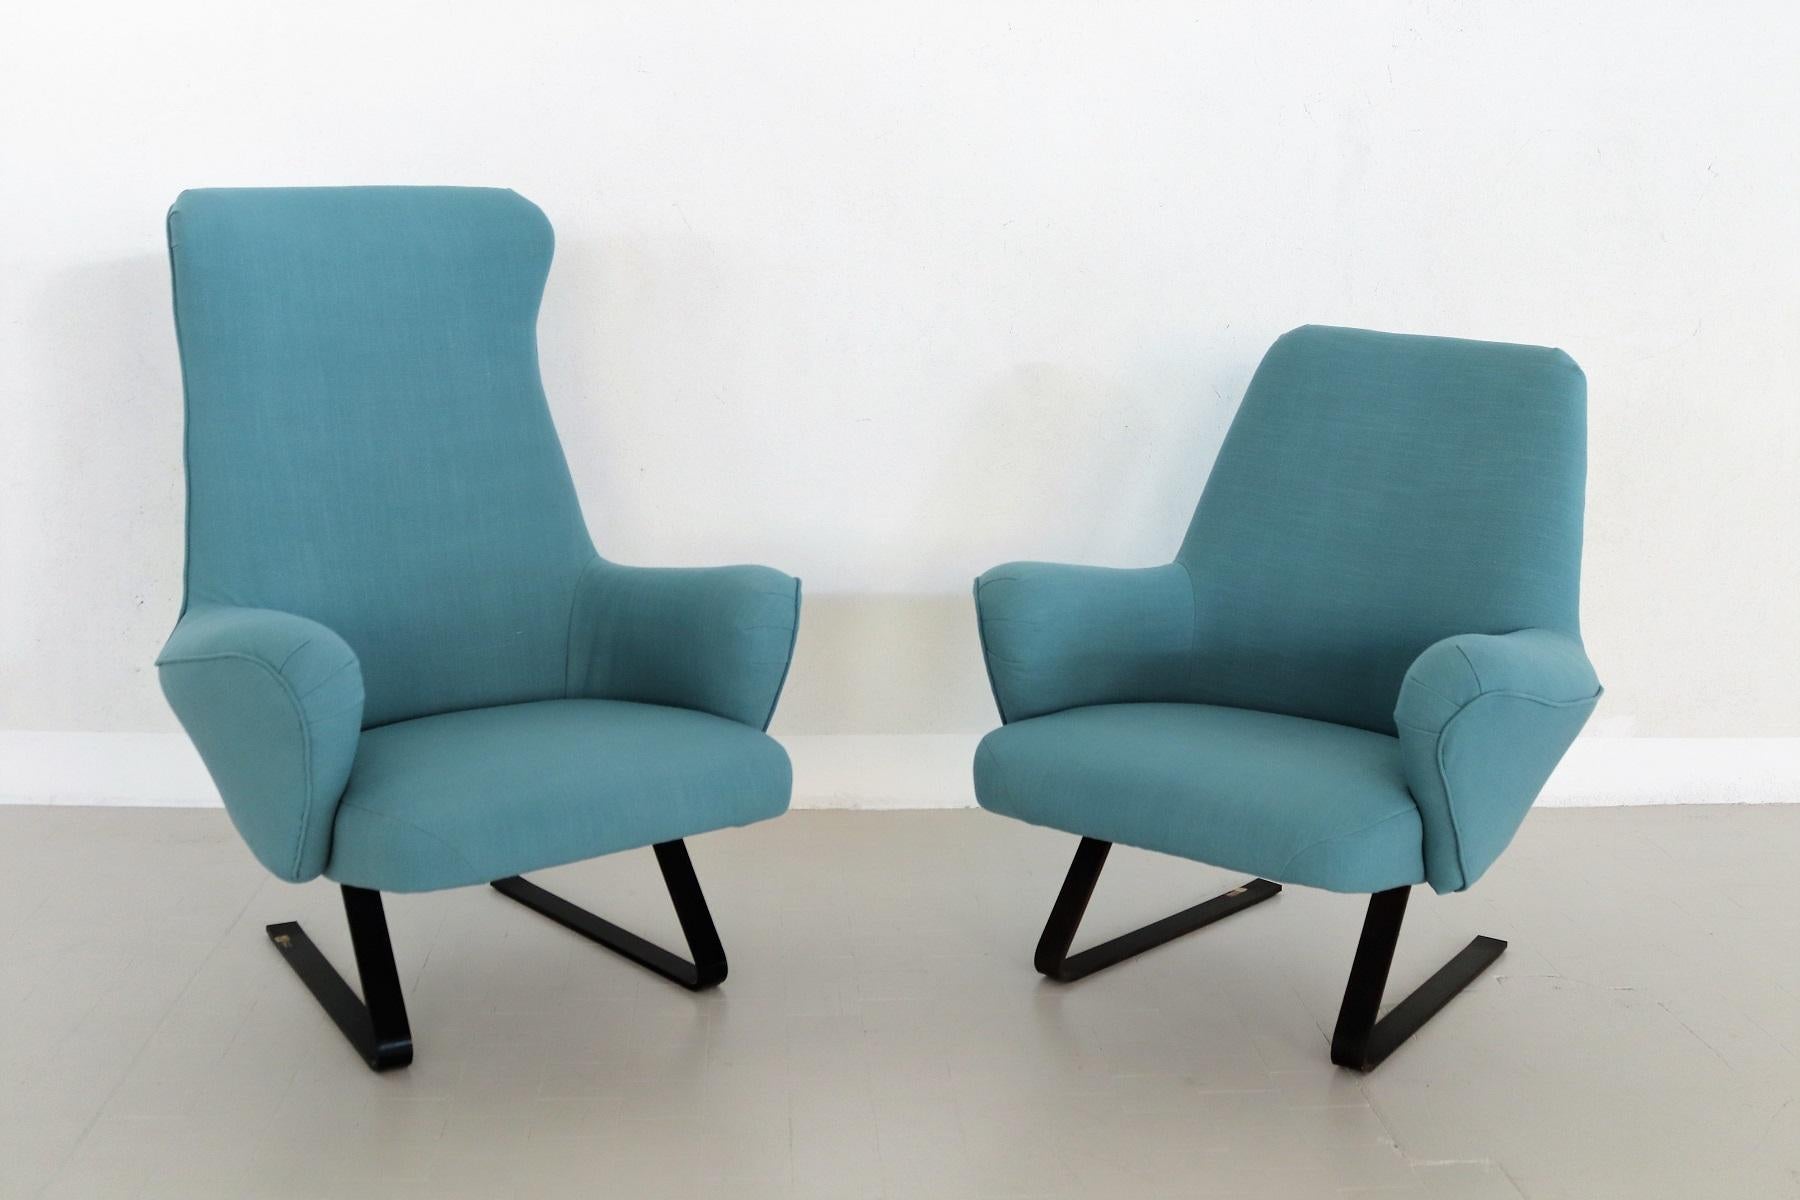 Gorgeous pair of armchairs completely re-made and up-holstered with petrol light blue mixed cotton fabric.
Design by Gianni Moscatelli for Formanova, made in Italy in the 1960s.
Both armchairs have ben complete re-made internally and